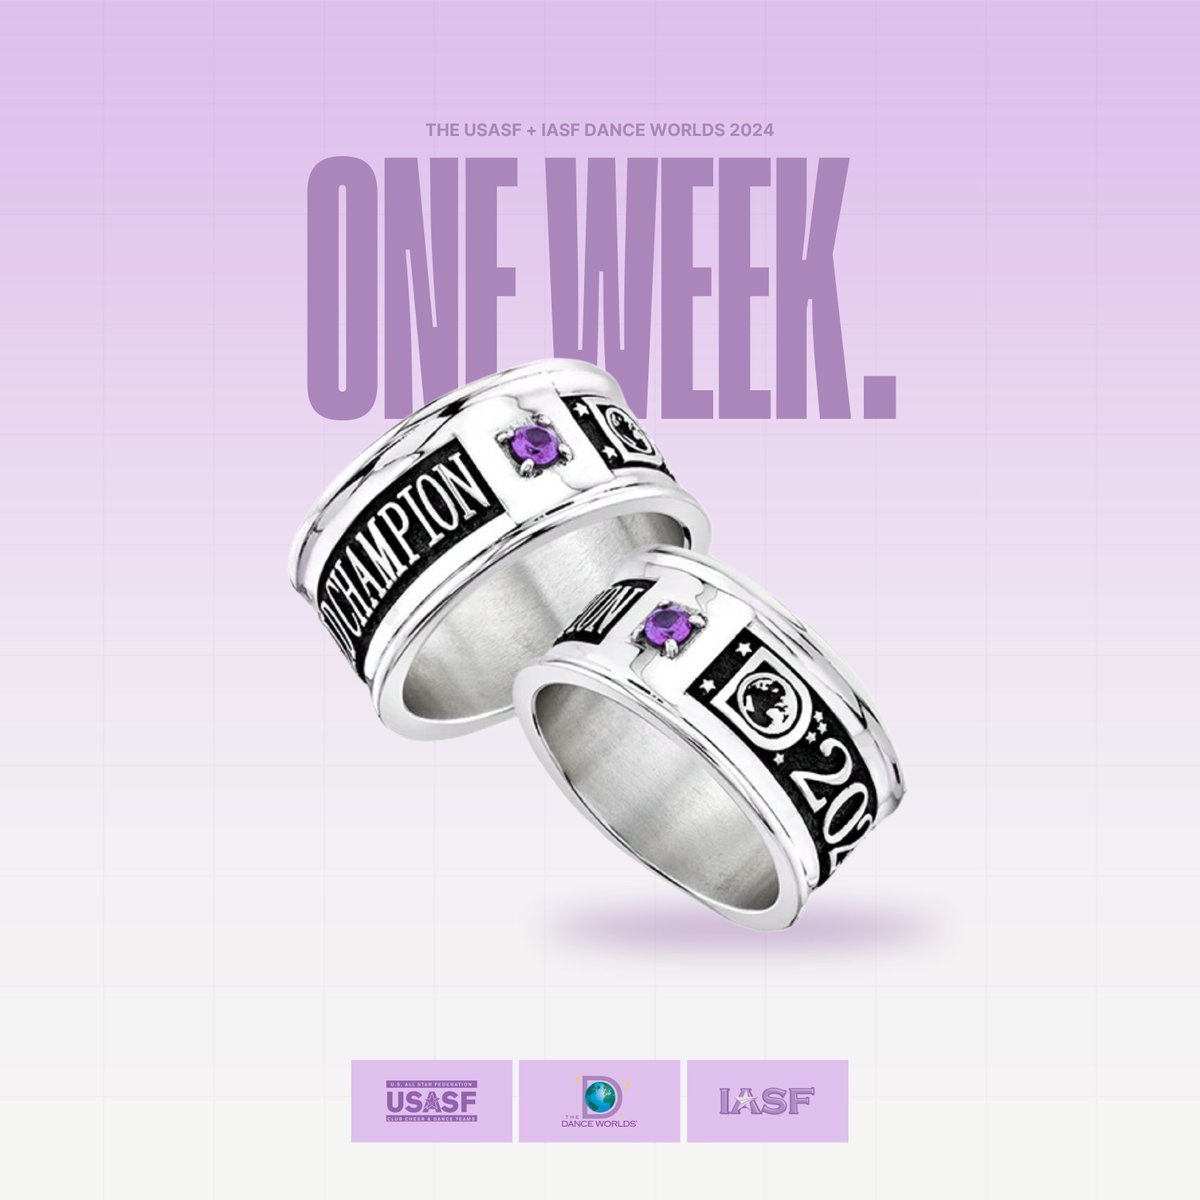 ONE WEEK until THE Dance Worlds 2024… it's got a RING to it 💍 Don’t miss a moment of THE Dance Worlds 2024 LIVE on FloCheer April 26-29 👏 Head to the link in our bio to secure your front-row seat to the action 🔗 @flocheer | #USASF #THEDanceWorlds #DanceWorlds2024